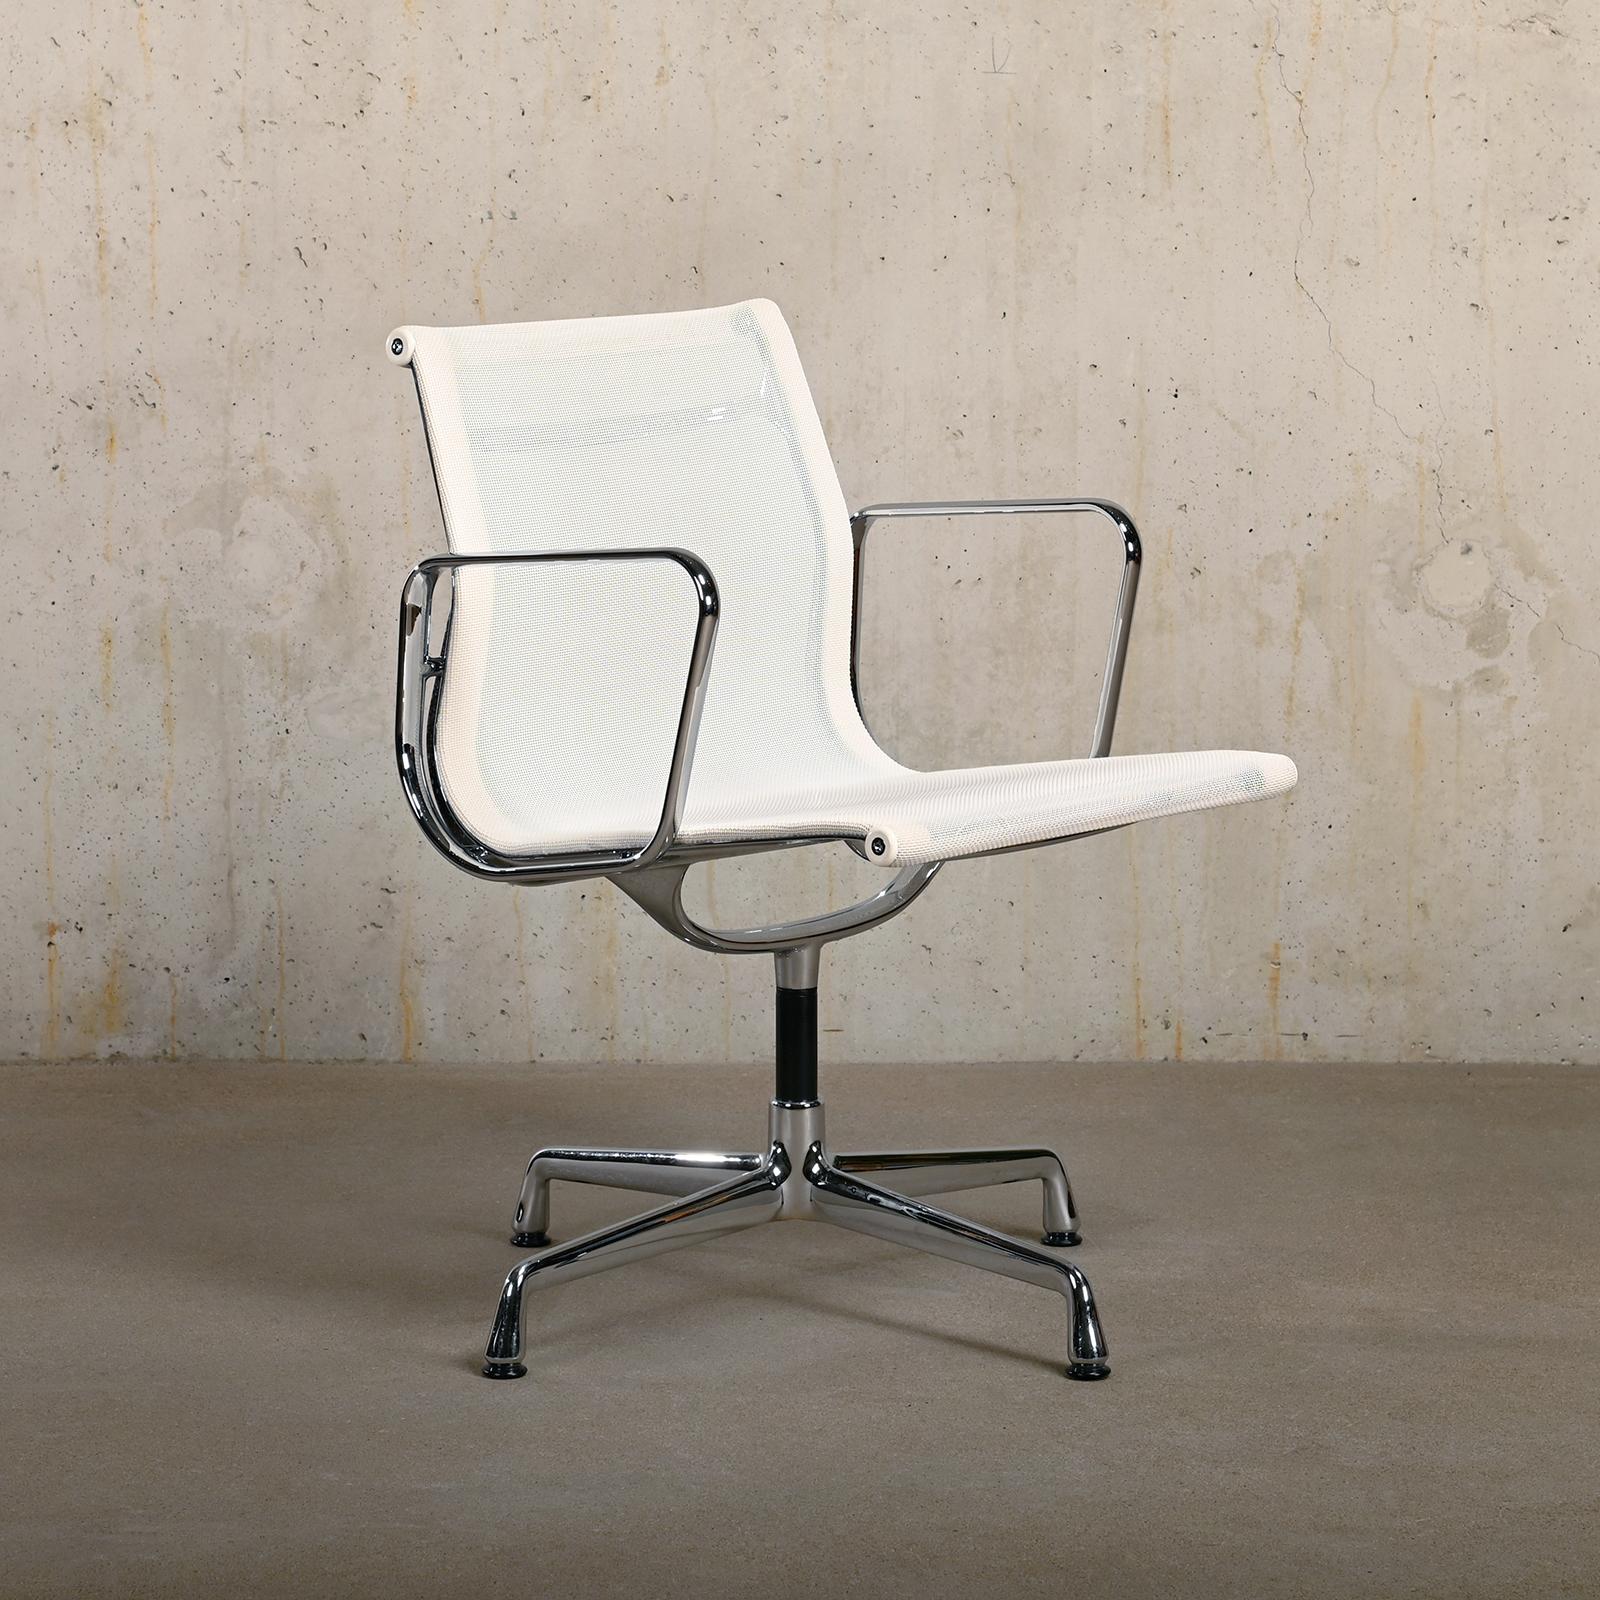 Comfortable dining and/or conference chair EA108 belonging to the iconic Aluminium Series designed by Charles & Ray Eames for Herman Miller (US) / Vitra (EU). Comfort is guaranteed with the Netweave Mesh fabric and swivel mechanism.
Chrome plated